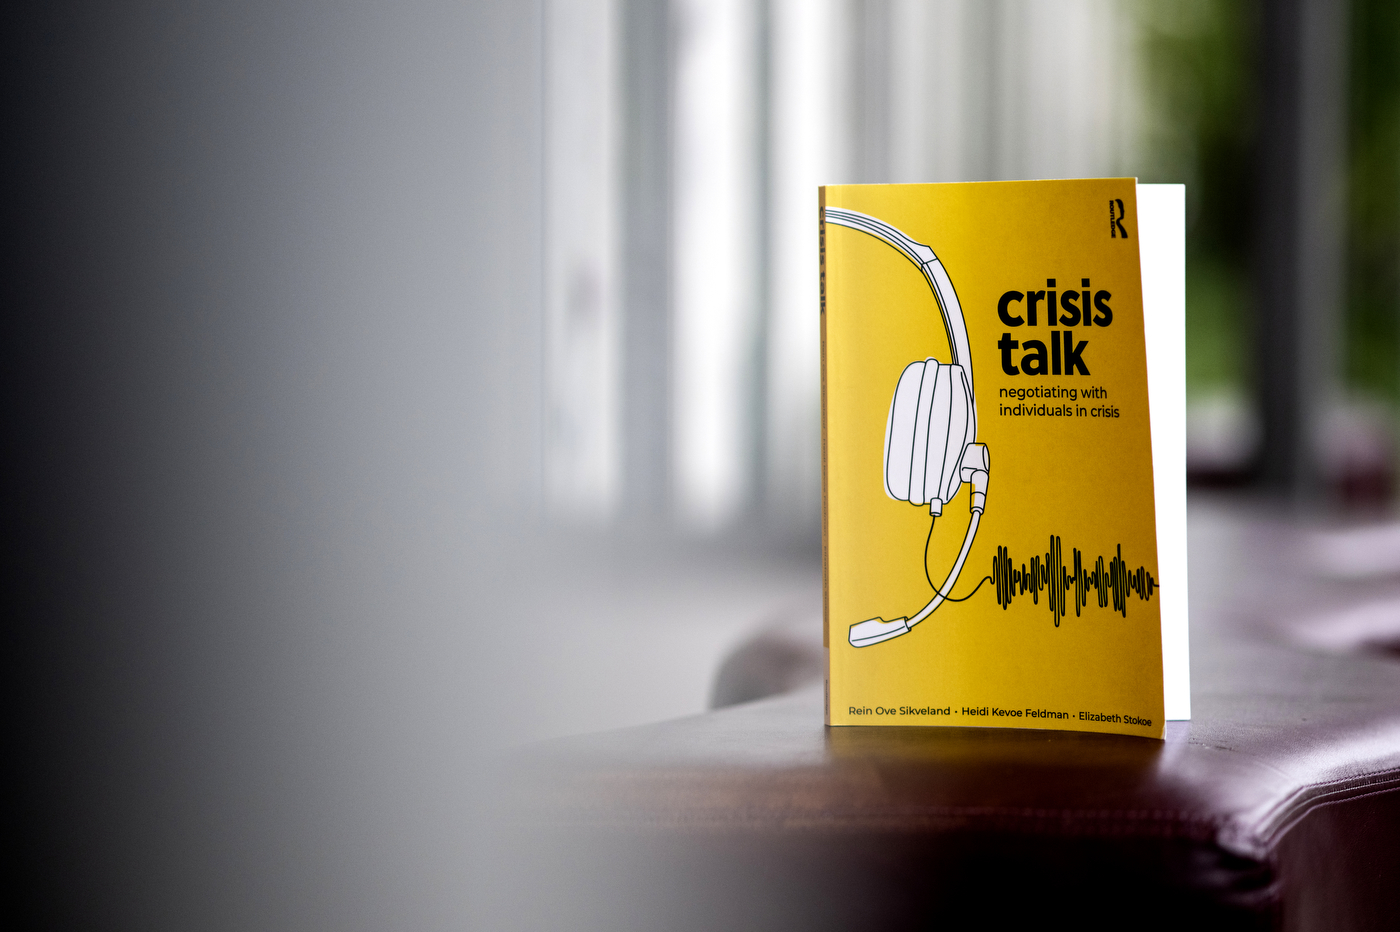 A book with the title "Crisis Talk" stands up on a table